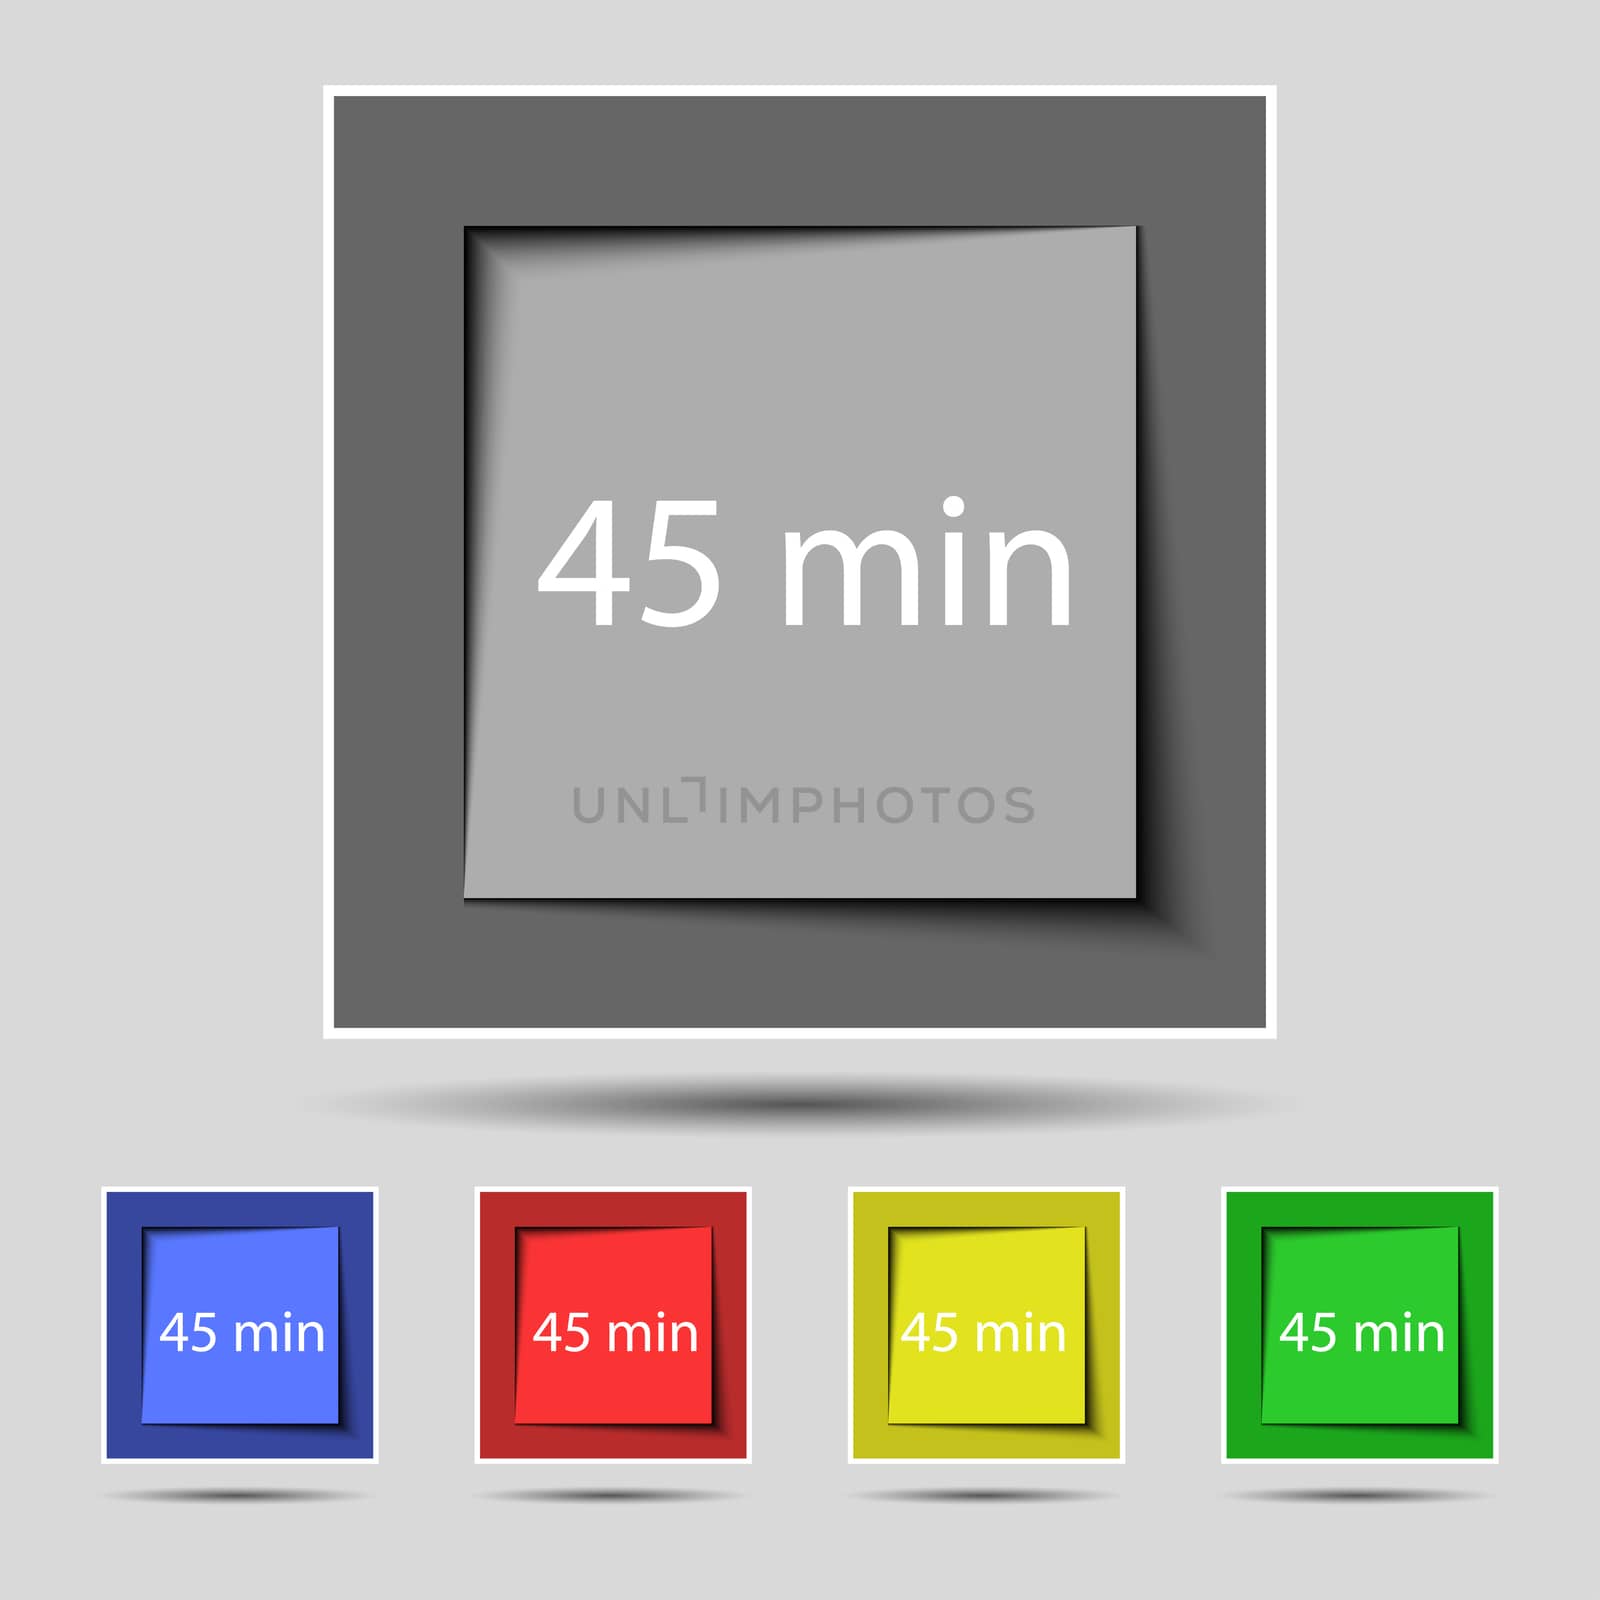 45 minutes sign icon. Set of colored buttons. illustration